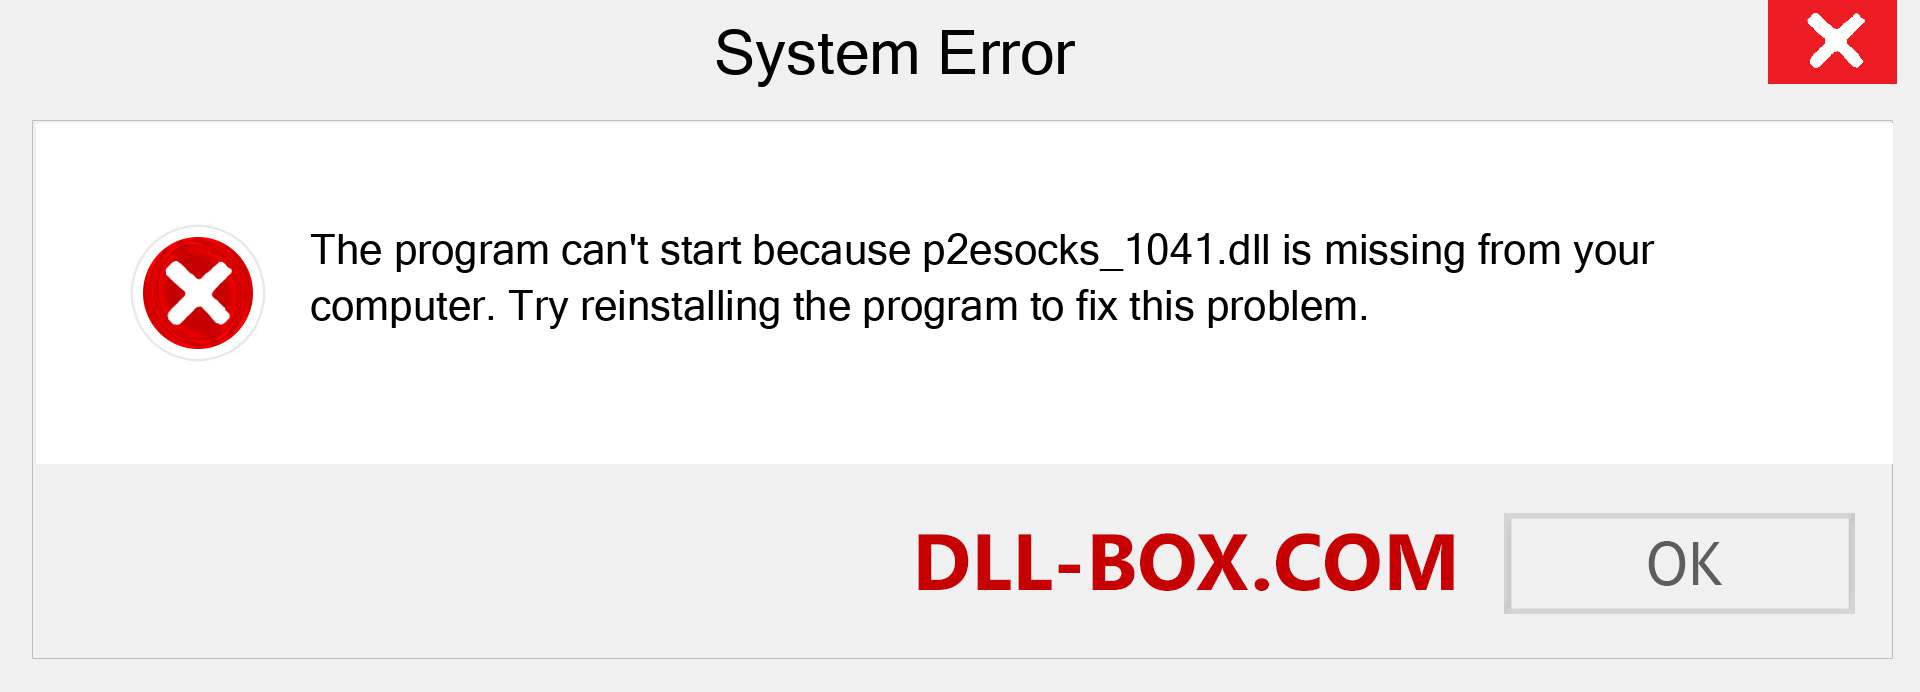  p2esocks_1041.dll file is missing?. Download for Windows 7, 8, 10 - Fix  p2esocks_1041 dll Missing Error on Windows, photos, images